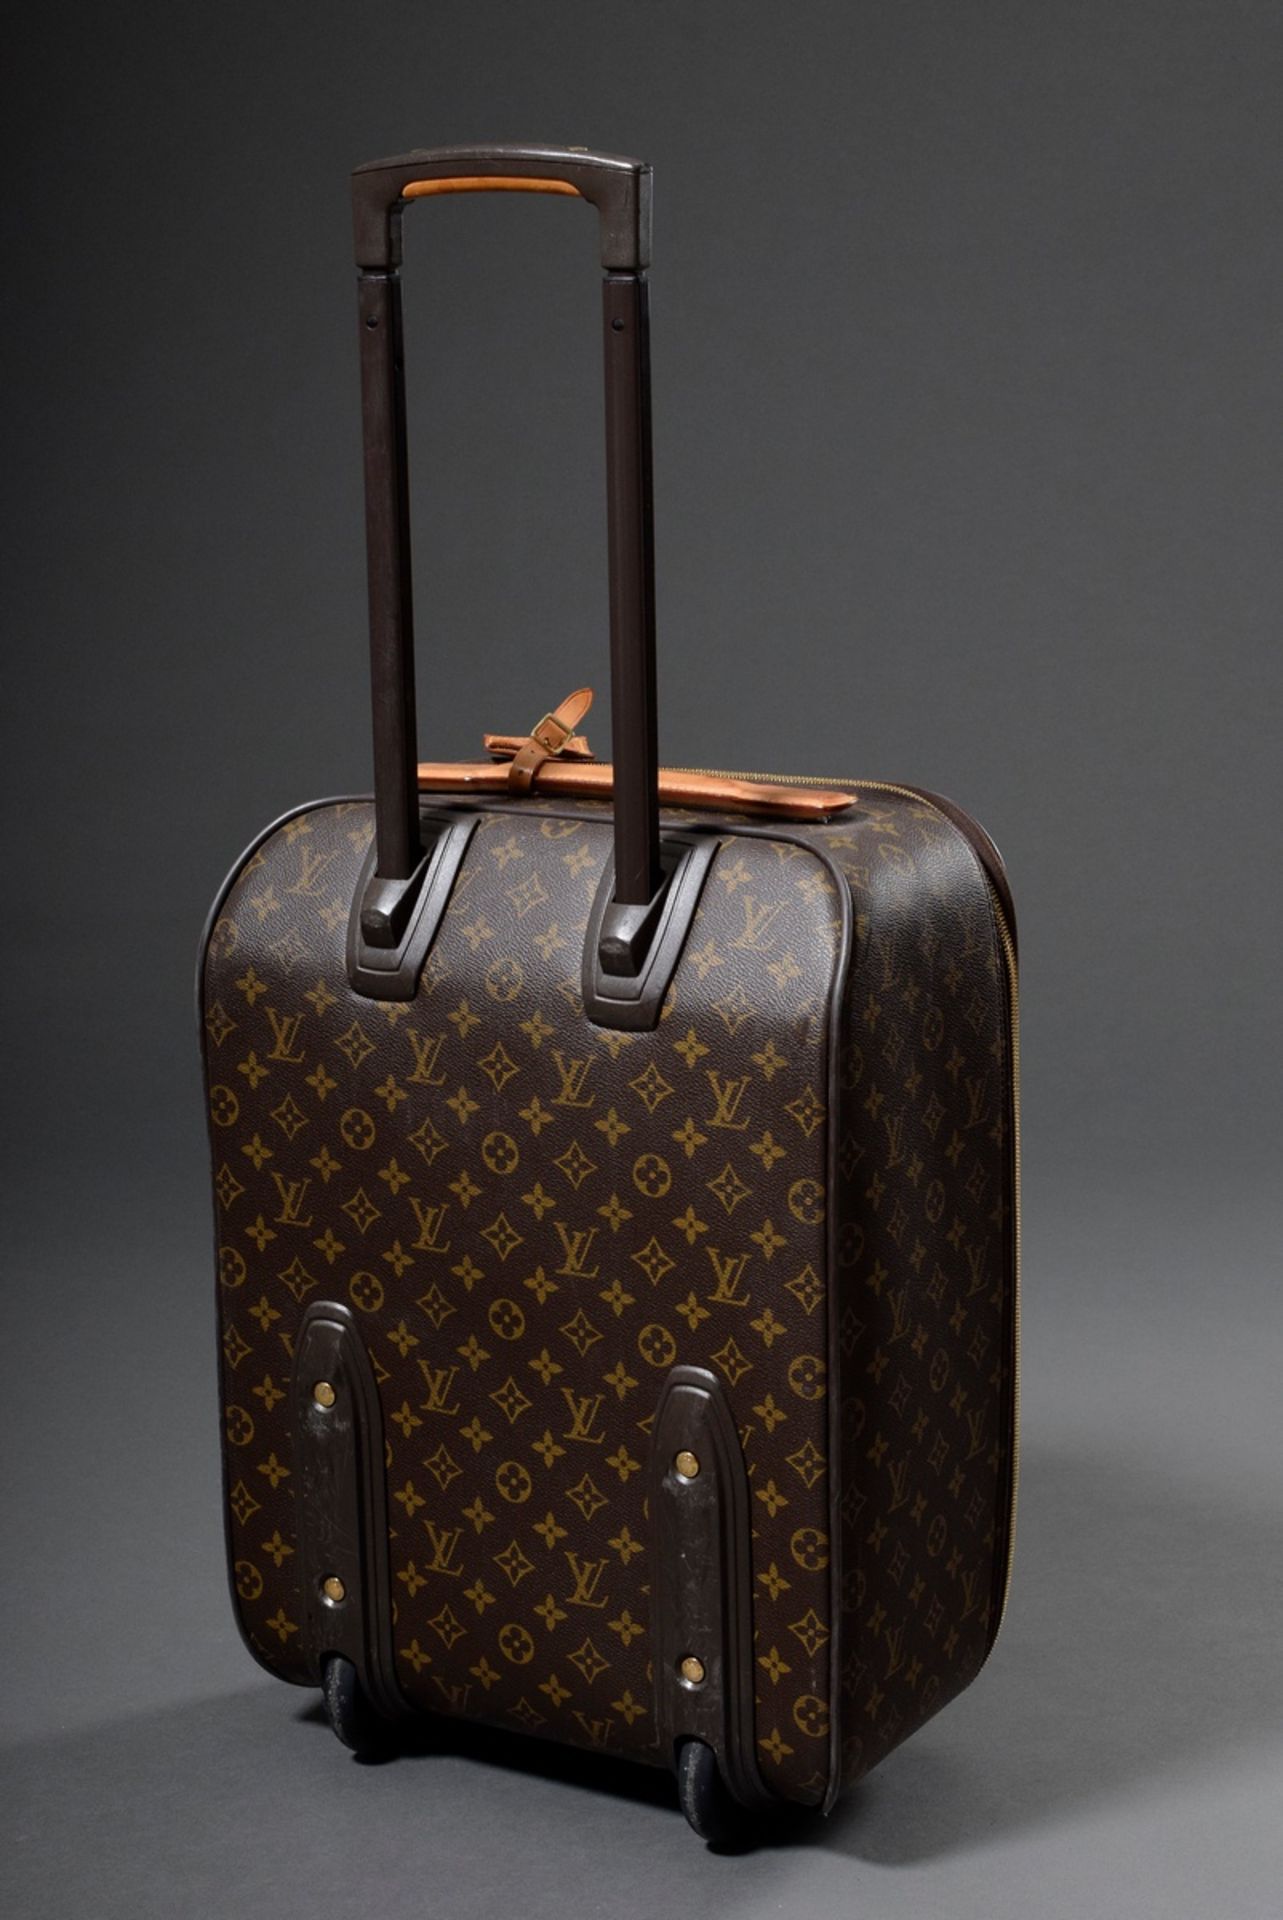 Louis Vuitton "Pégase 50" in "Monogram Canvas" with light cowhide details, gold-coloured hardware,  - Image 2 of 6